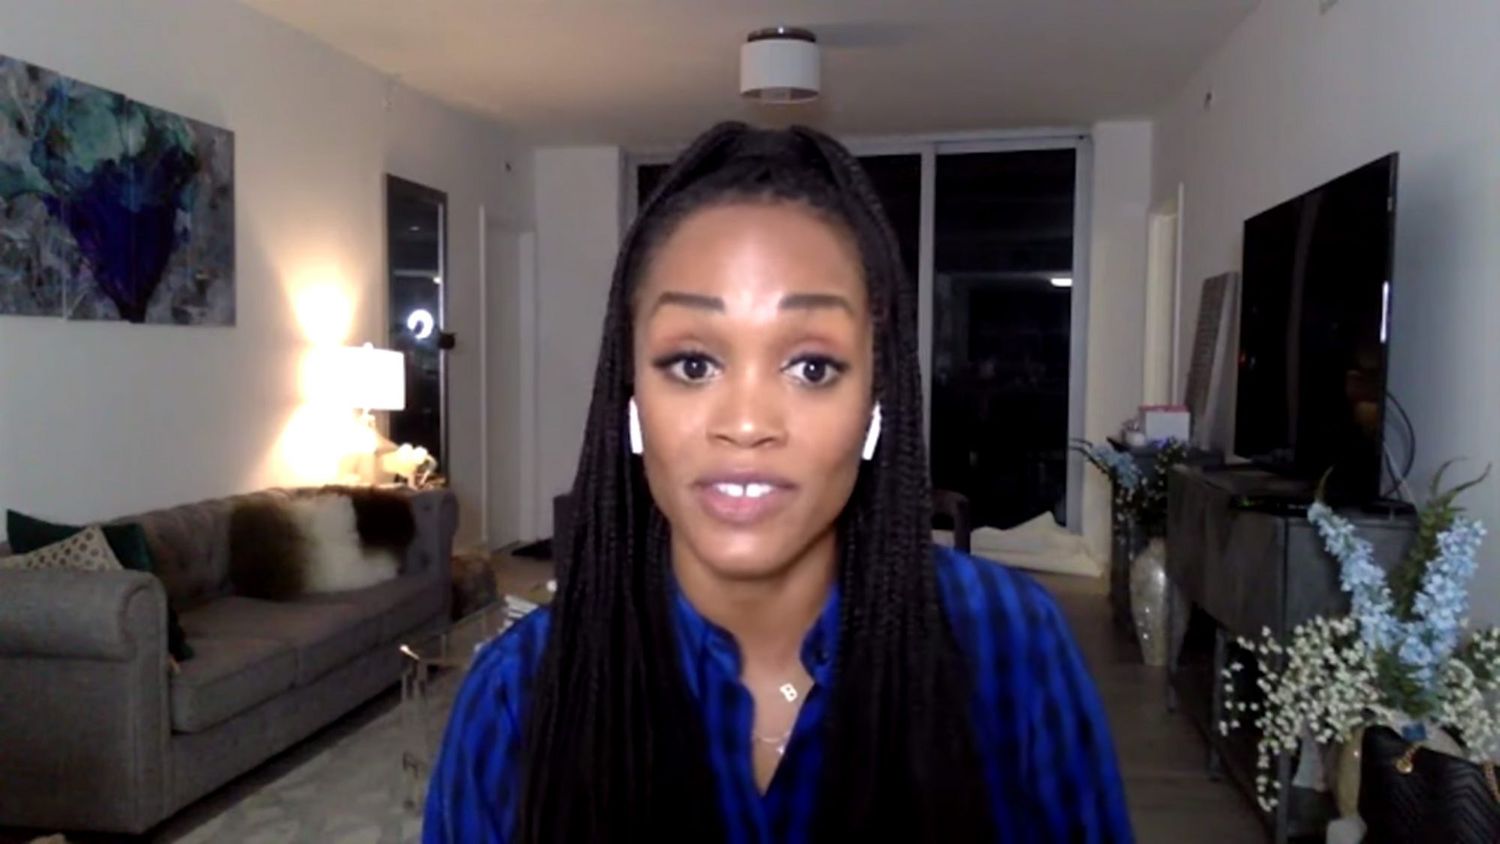 Rachel Lindsay Says There Was a 'Racist Contestant' on Her Season of The Bachelorette